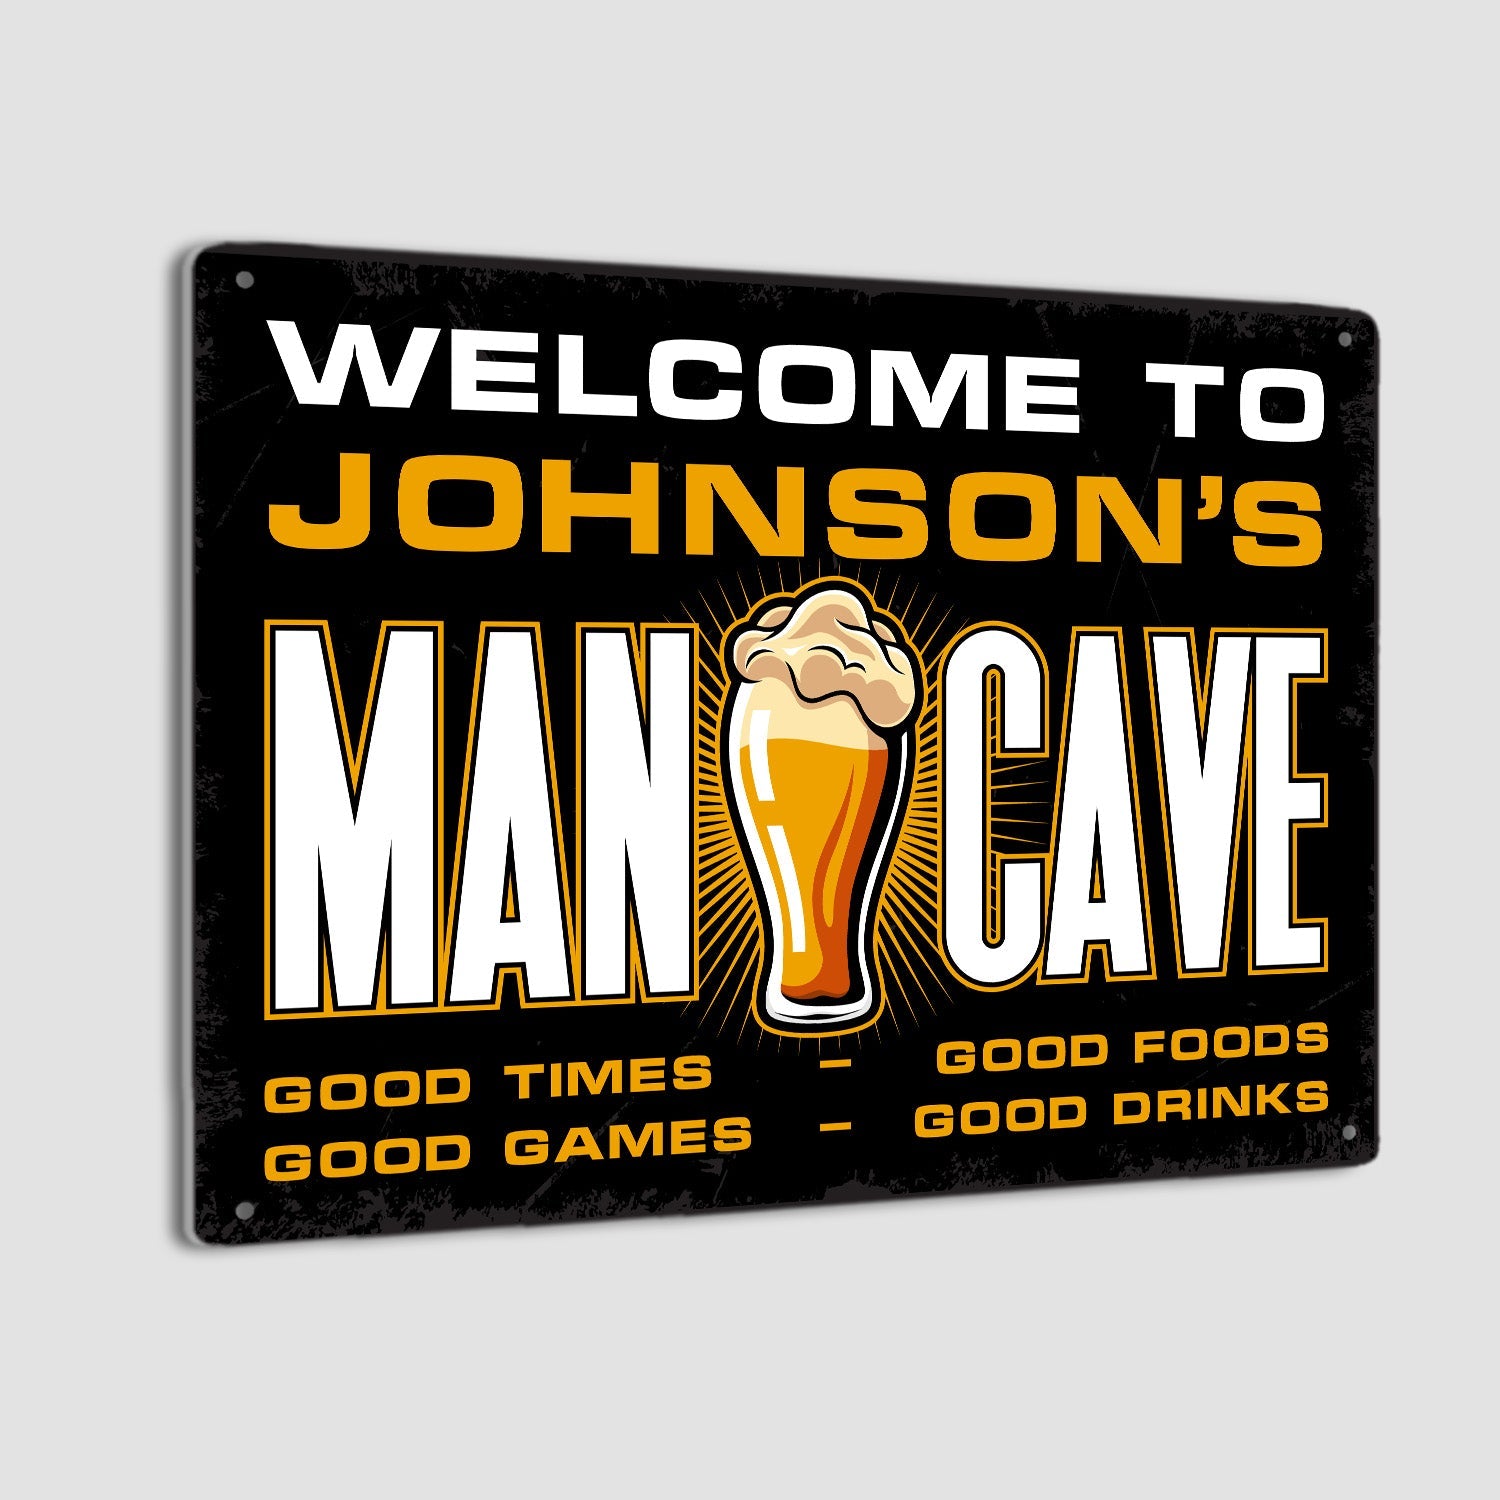 Welcome To Man Cave, Beer Cave, Good Time, Good Foods, Good Game, Good Drinks, Custom Metal Signs